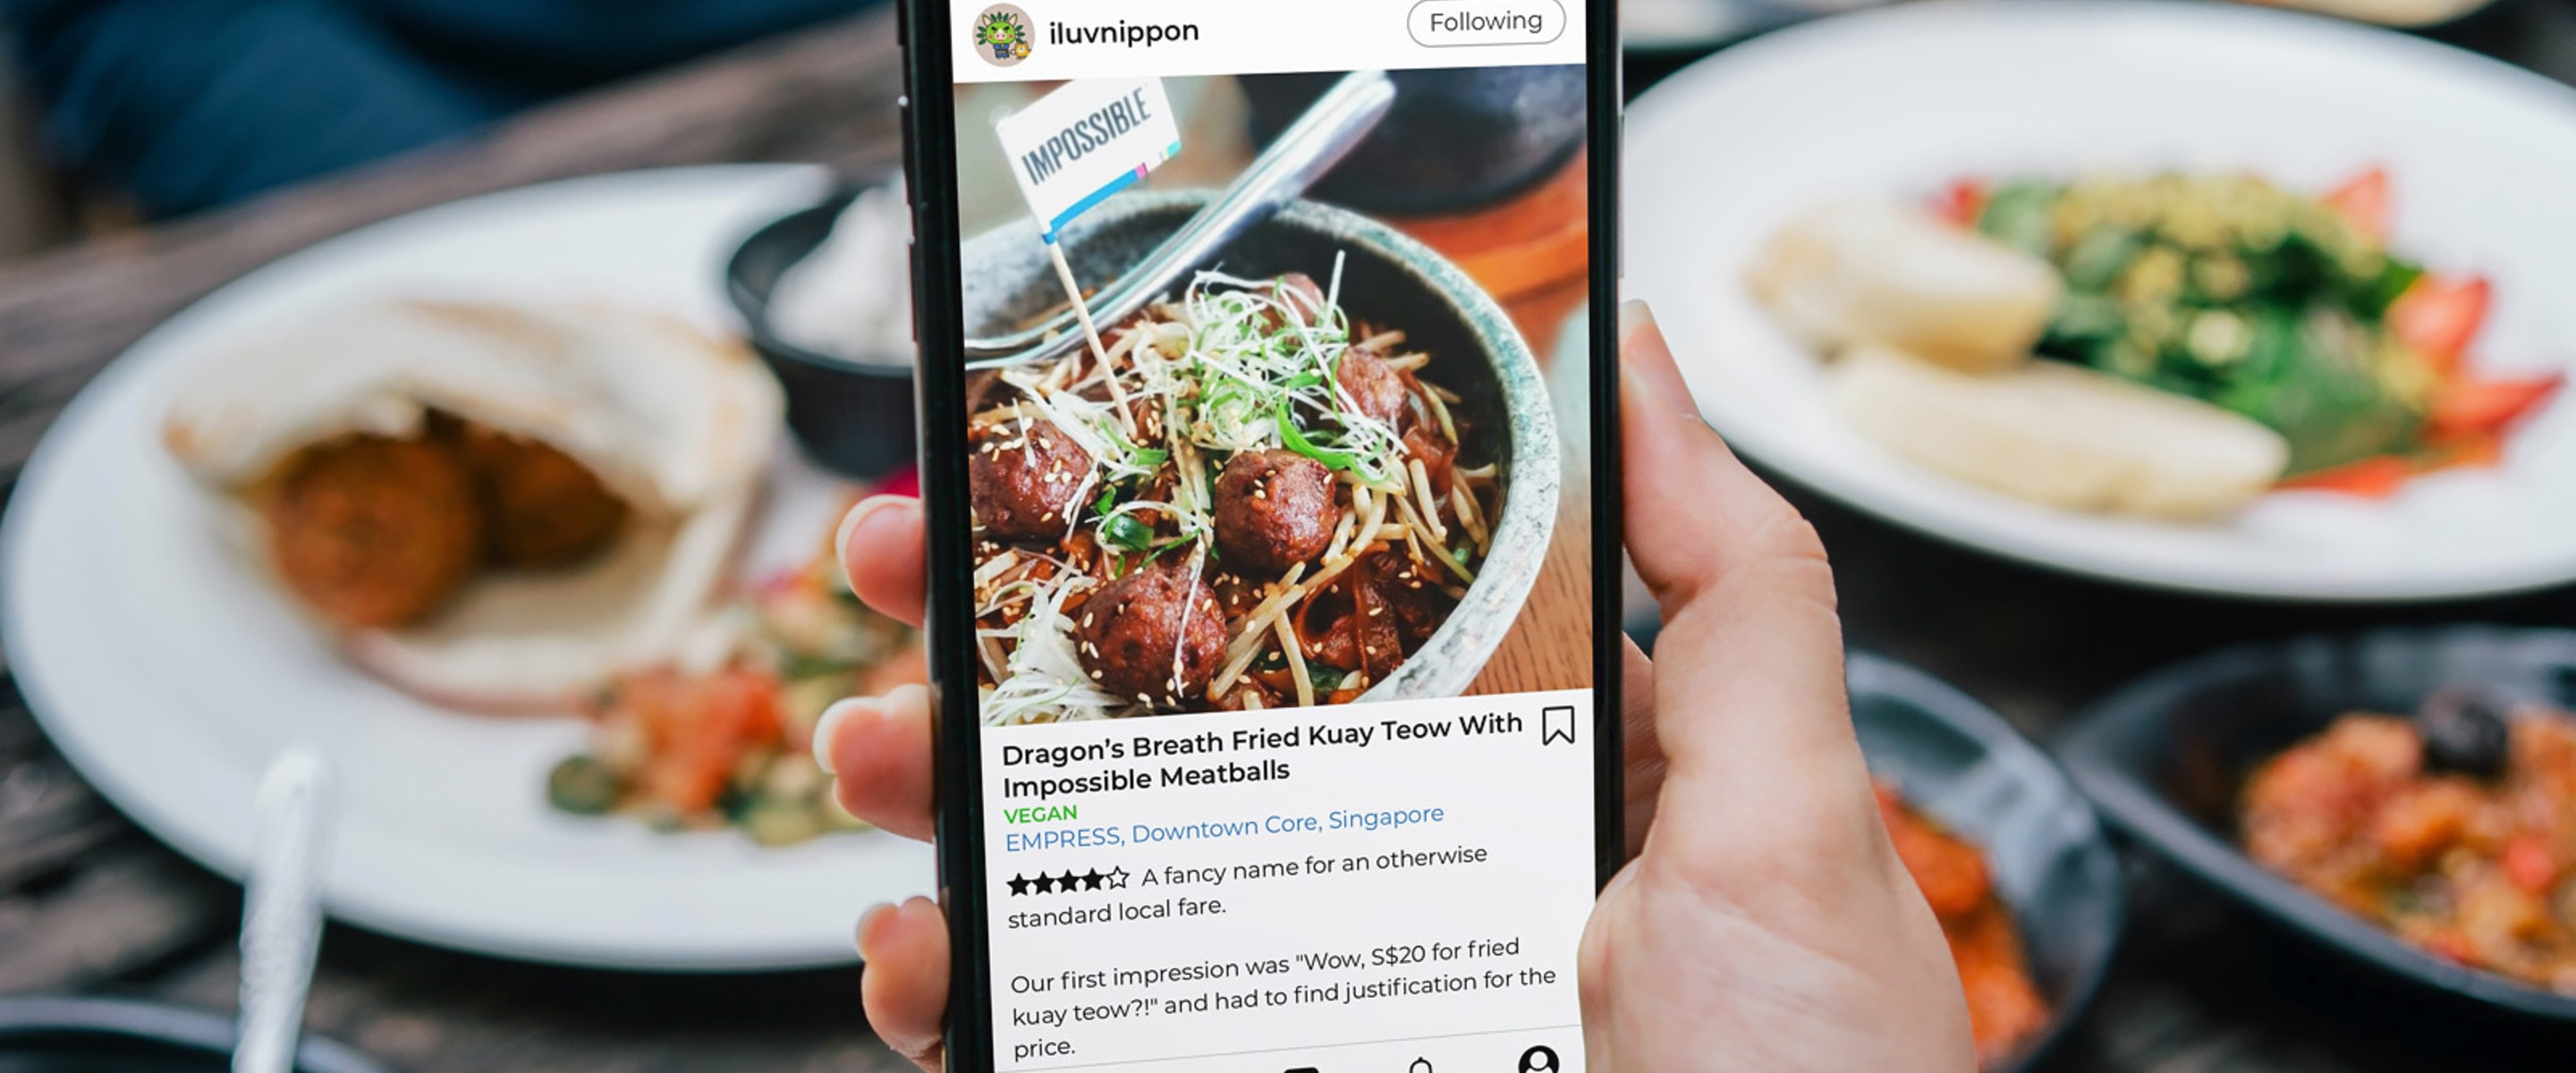 Want to Find More Vegan Businesses Near You? These Apps and Tools Are Just What You Need